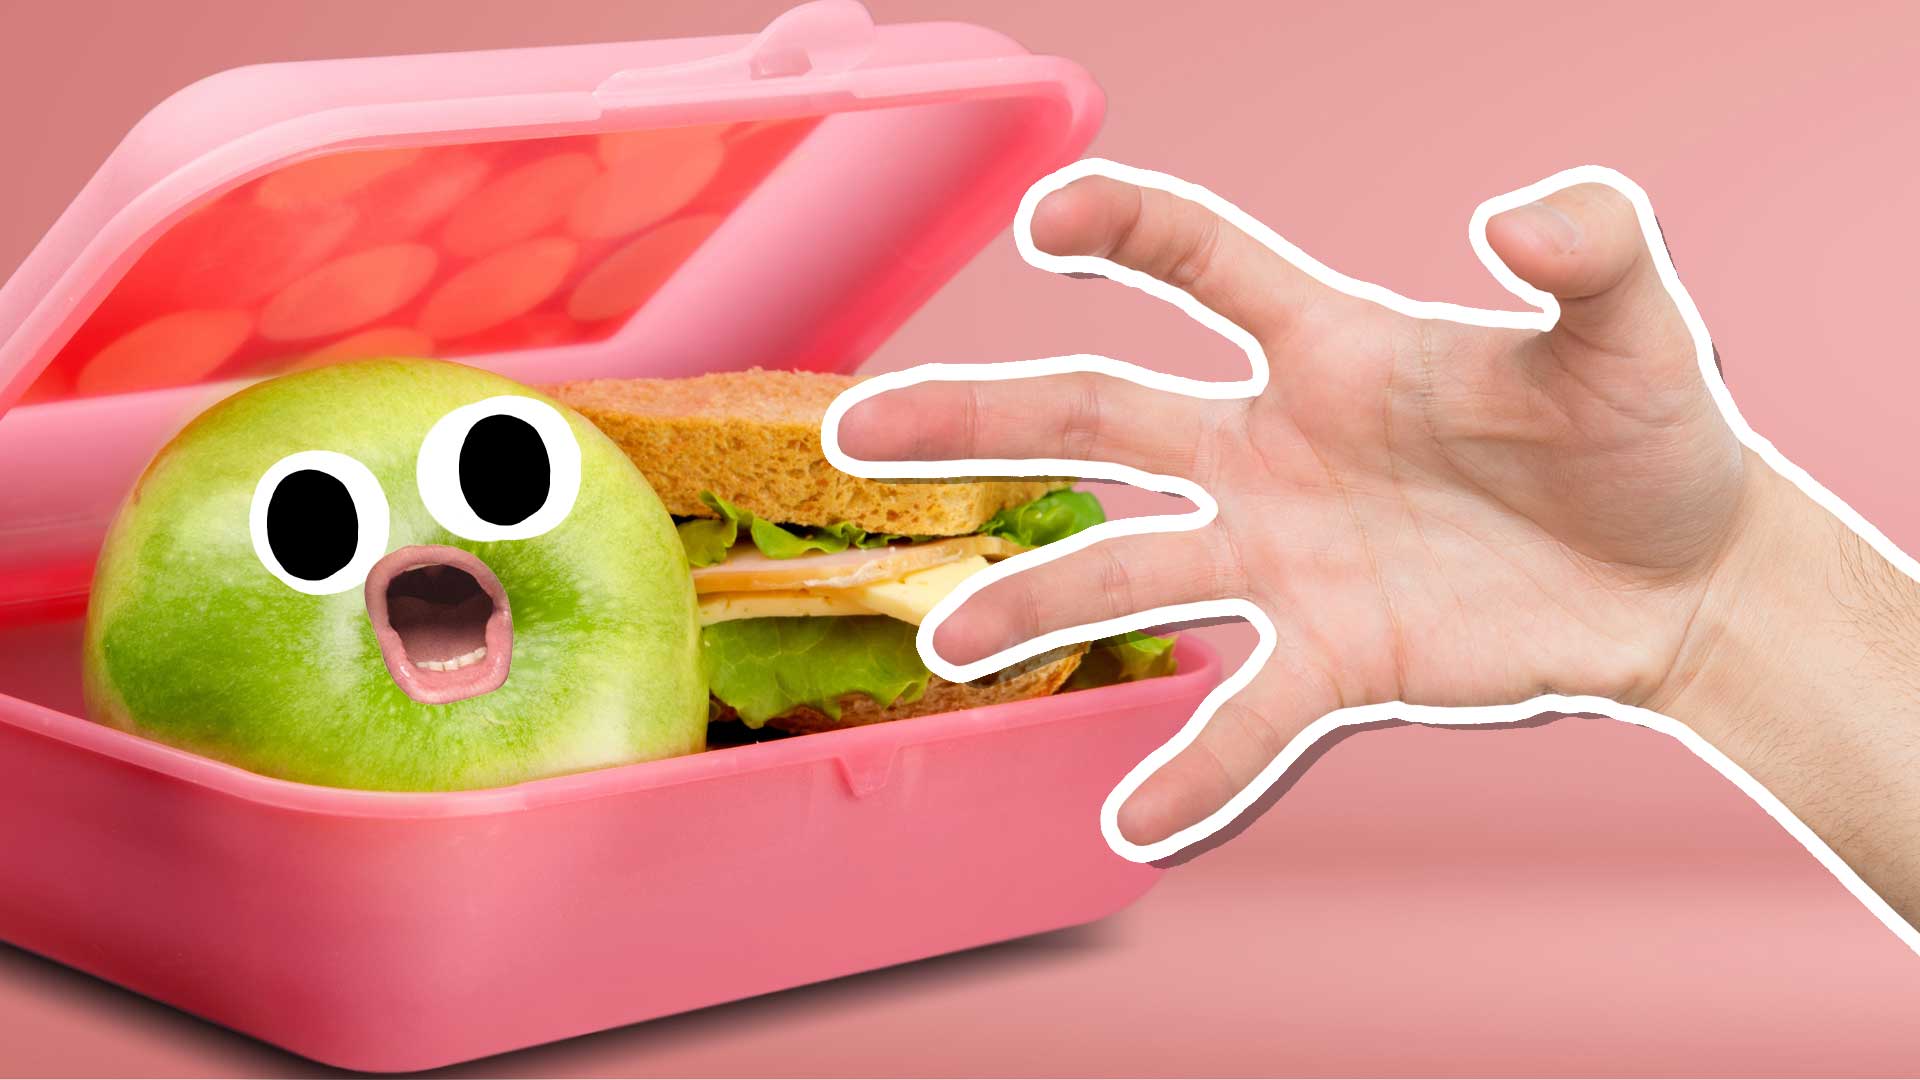 A hand reaching for a delicious packed lunch